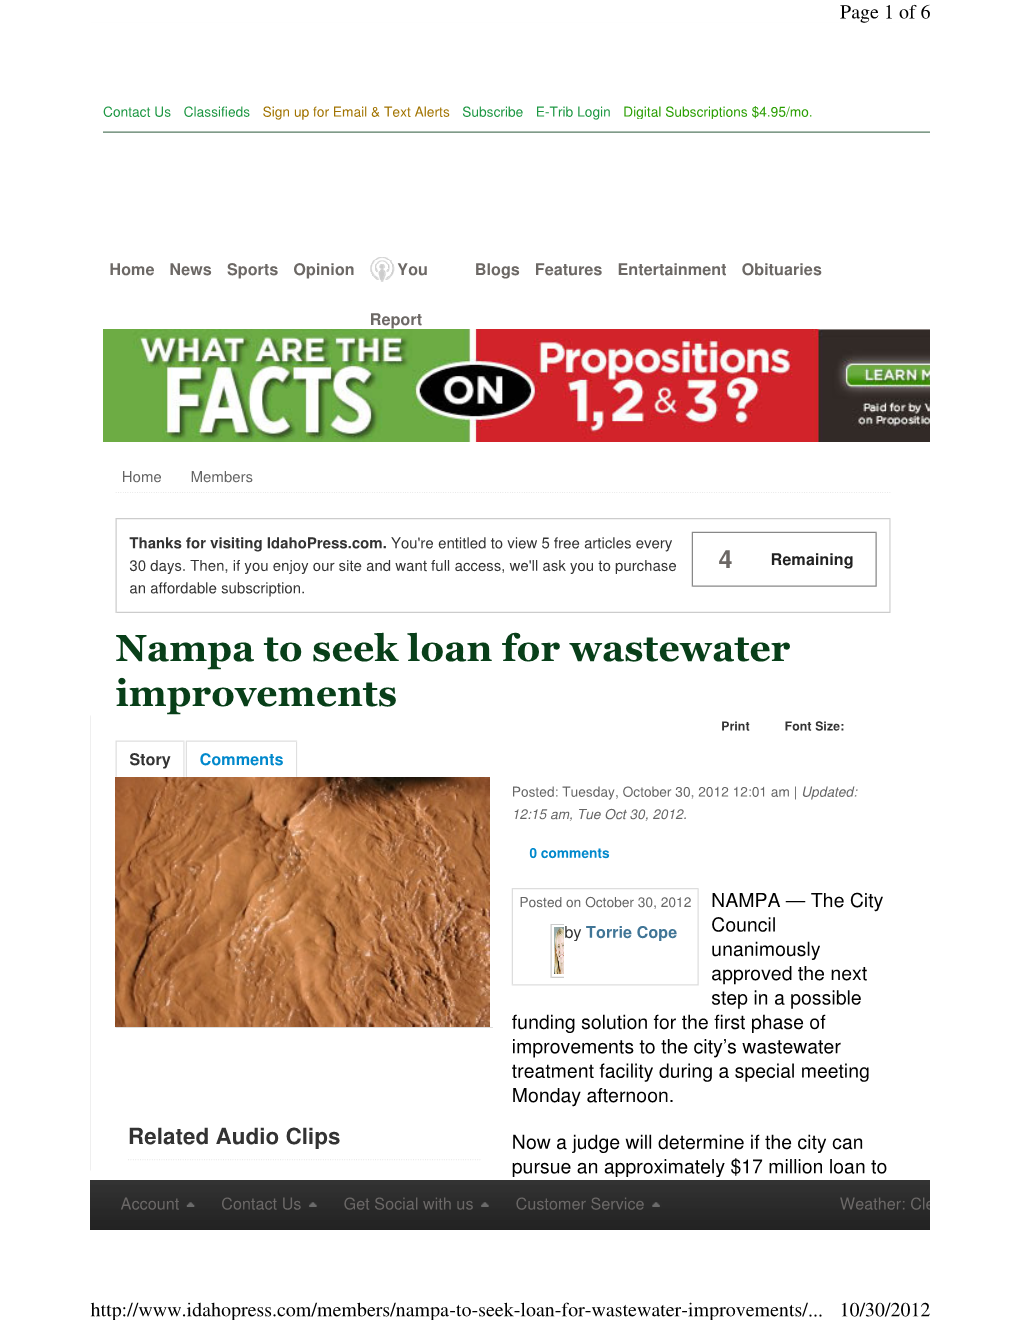 Nampa to Seek Loan for Wastewater Improvements Print Font Size